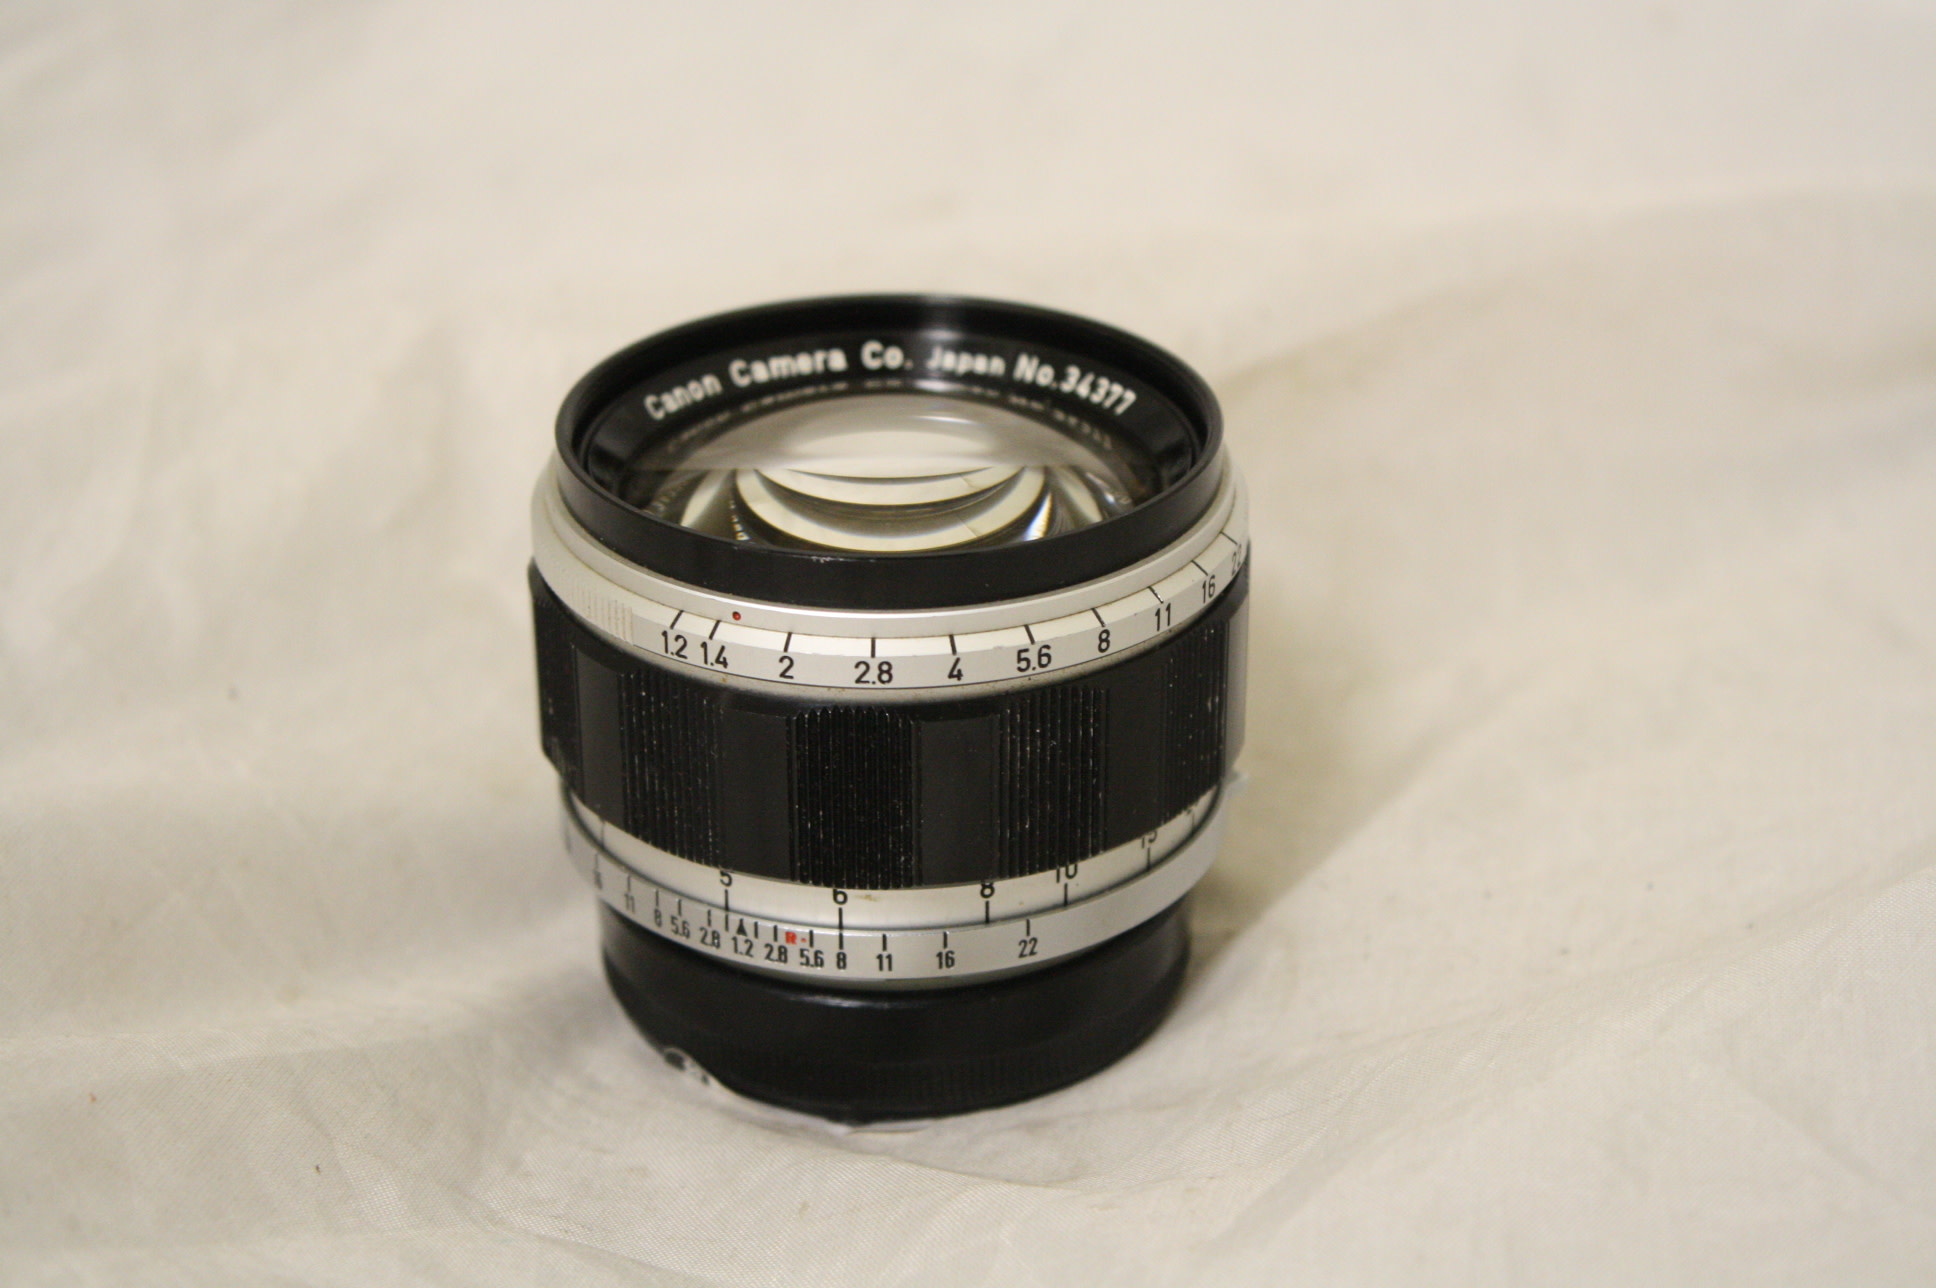 Canon 50mm f/1.2 Lens LTM L39 Leica Screw Mount with Leica M3